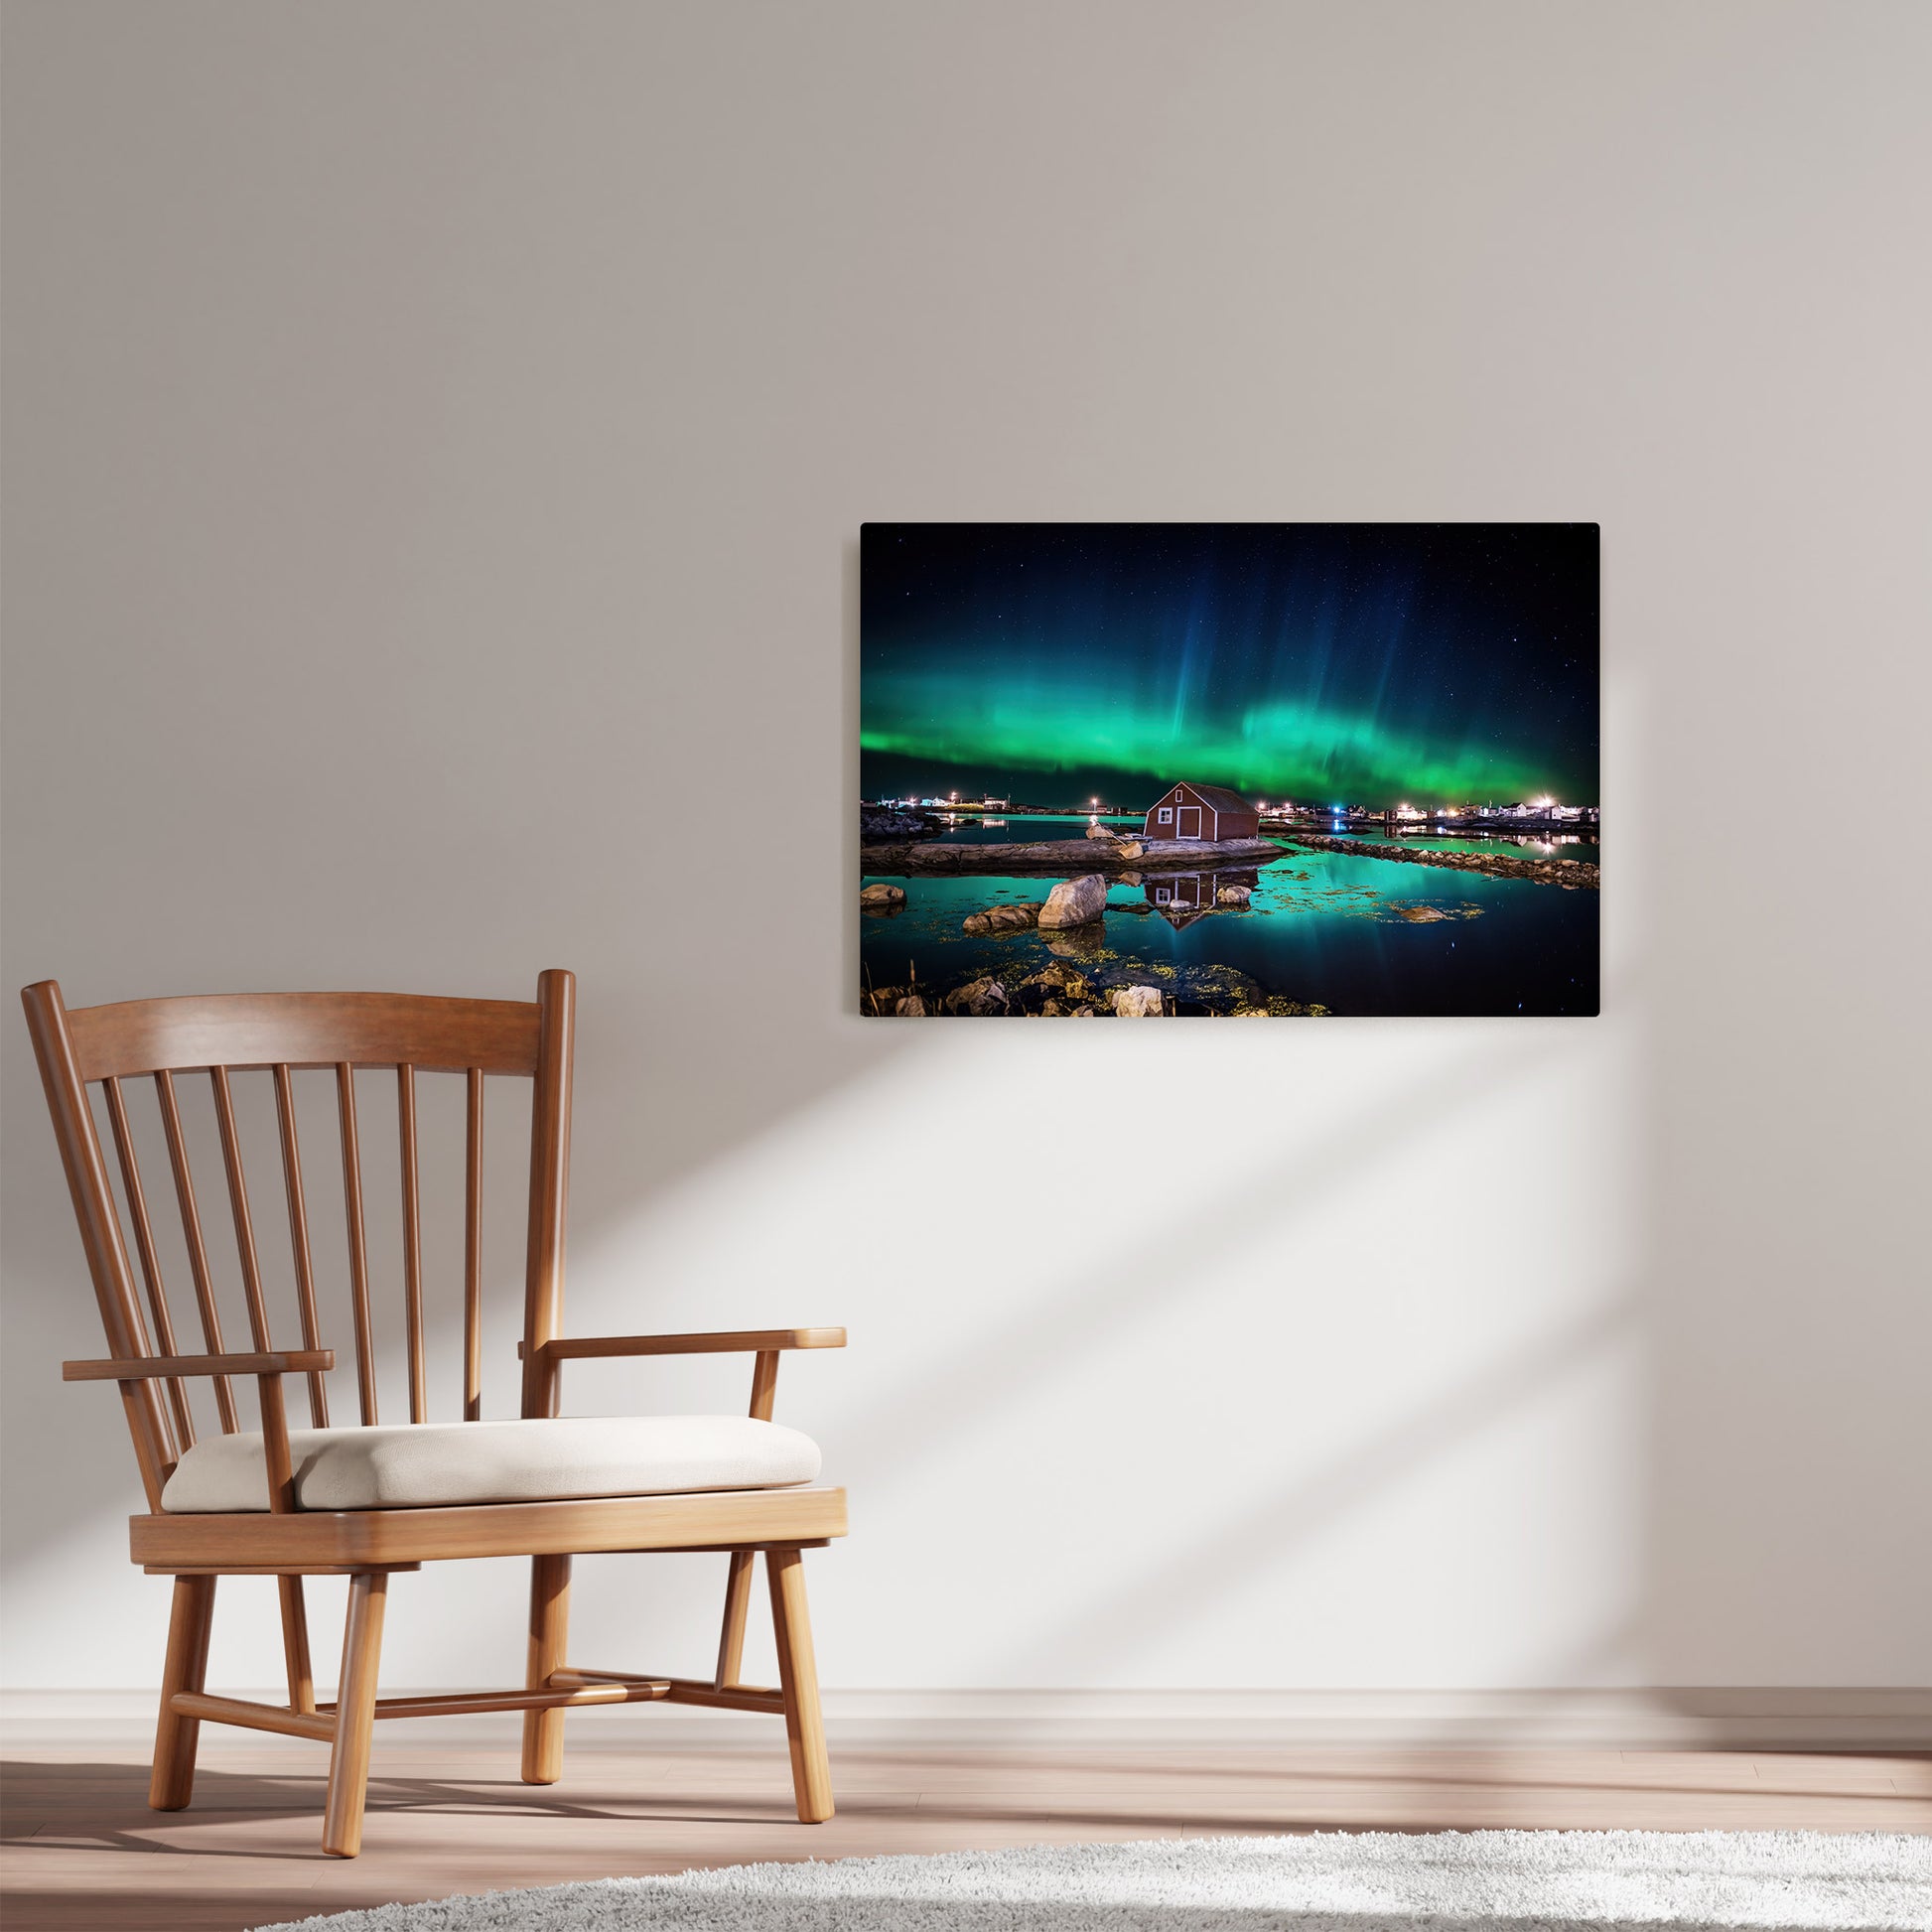 Ray Mackey's Tilting Aurora photography reproduced on HD metal print and displayed on wall